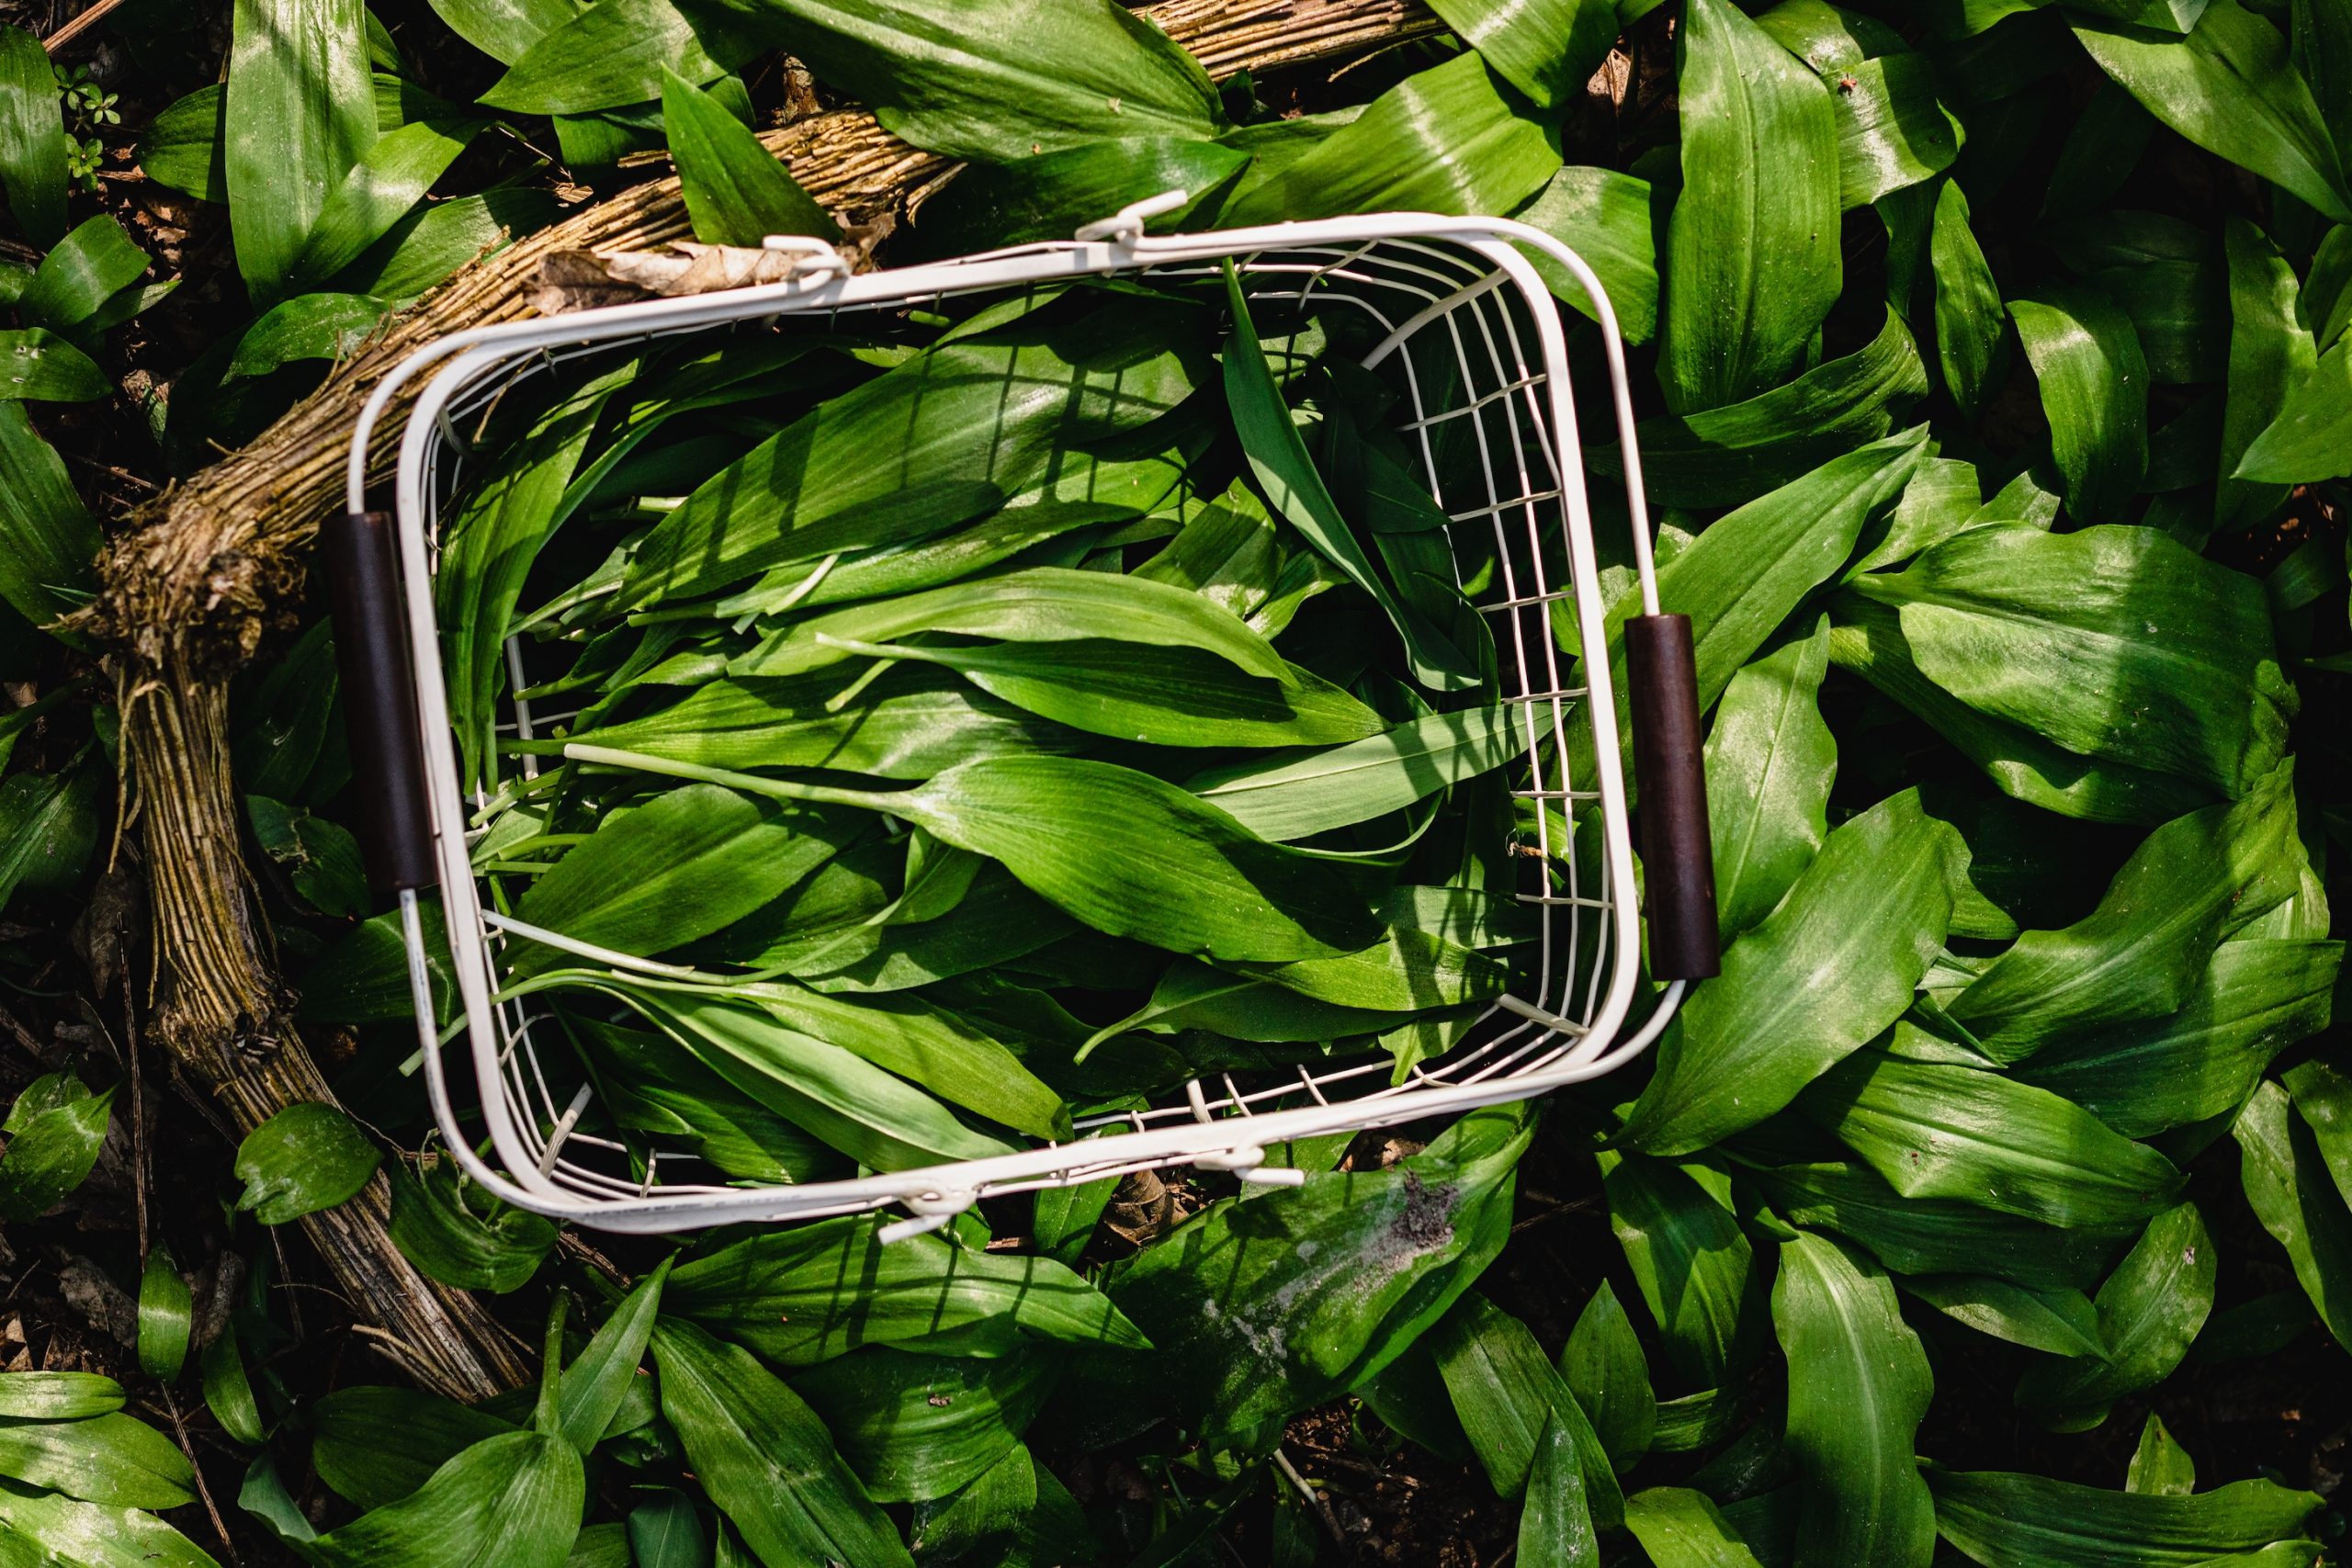 Freshly picked wild garlic in a basket on the forest floor